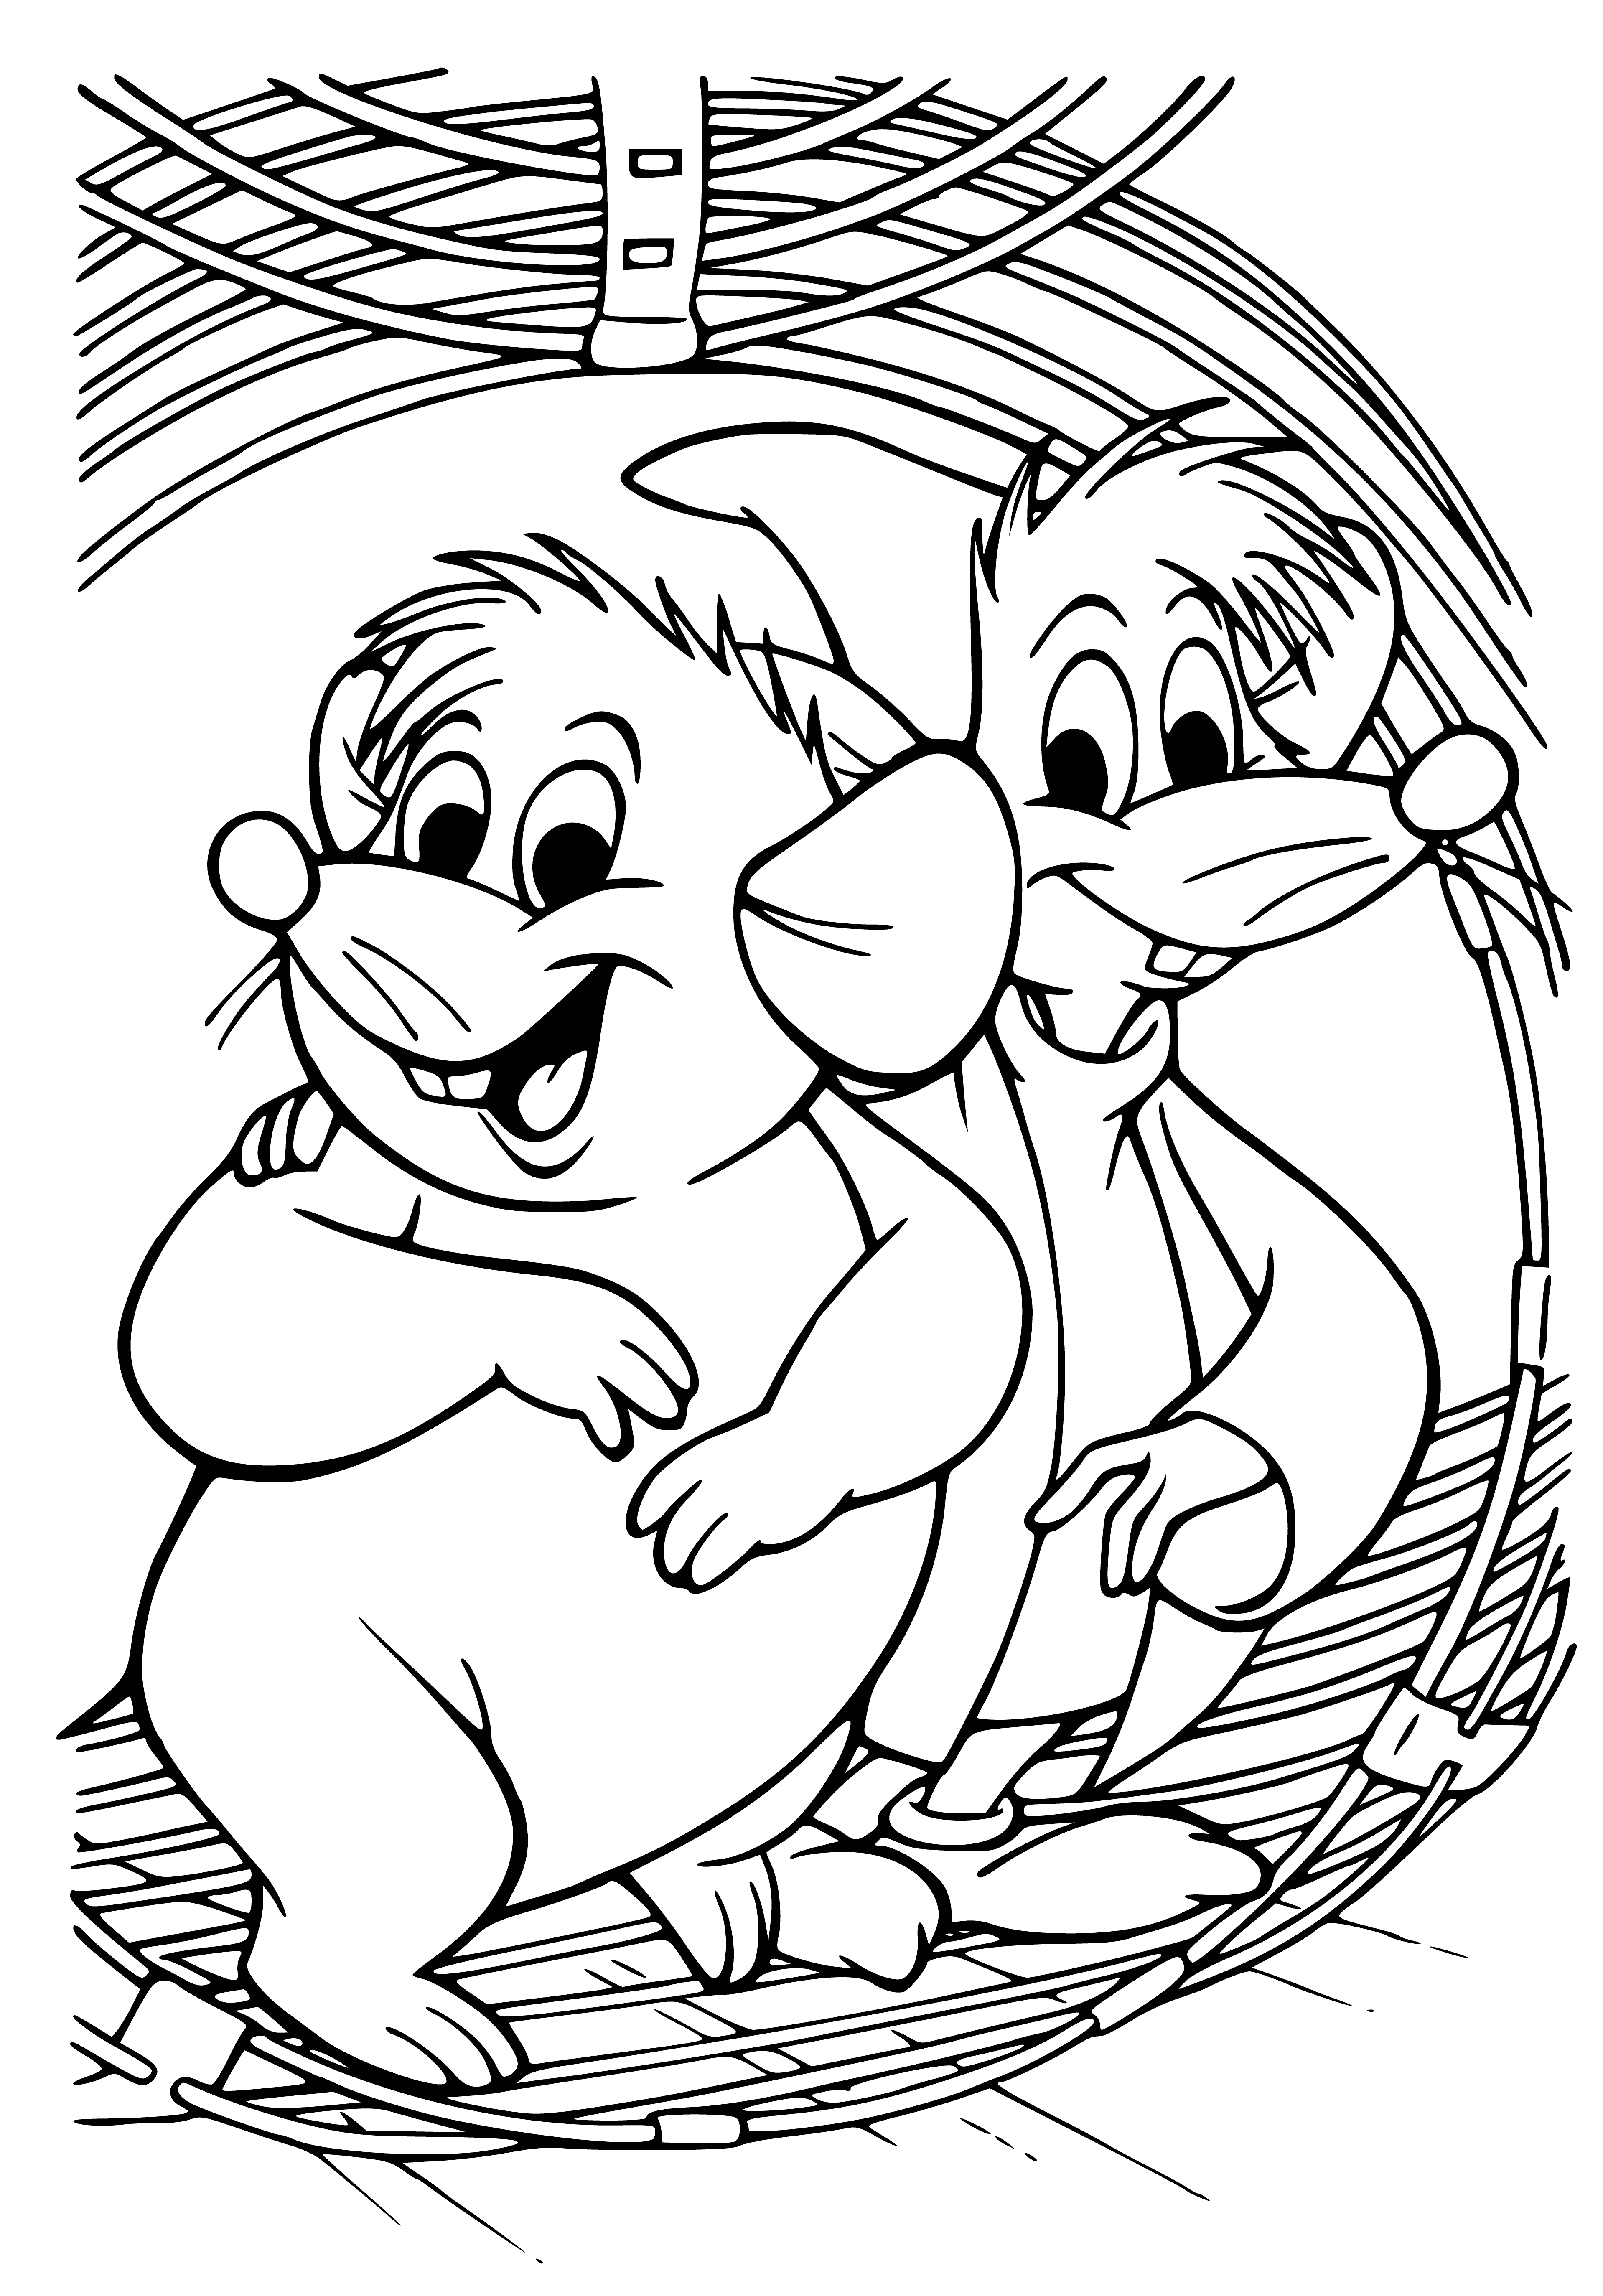 Mice on the loose coloring page